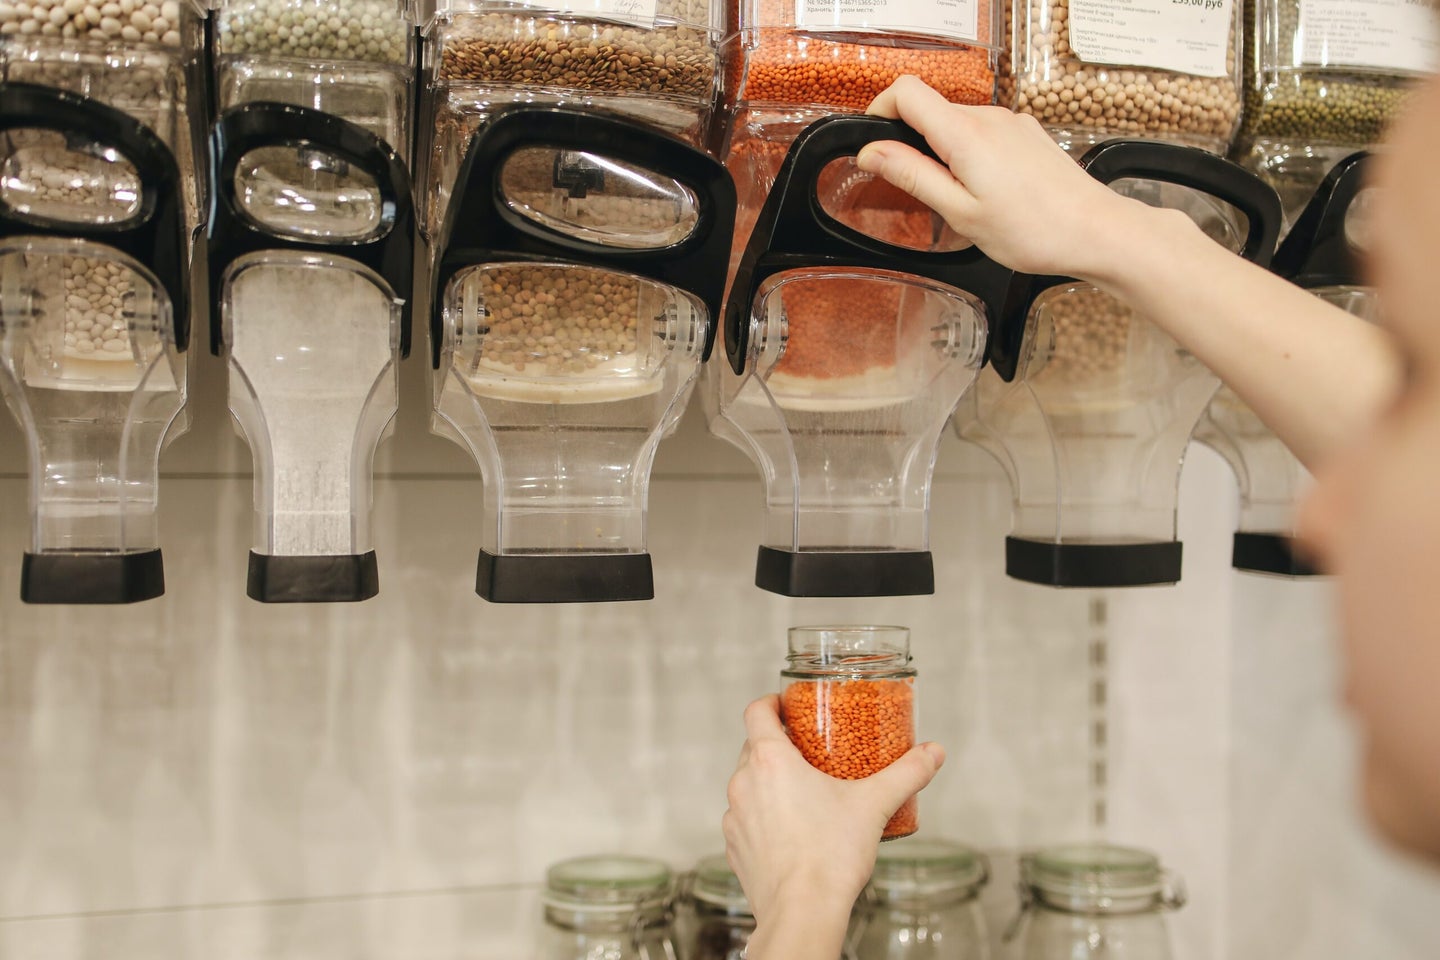 Low or no-waste stores can be pricey. Can that change?